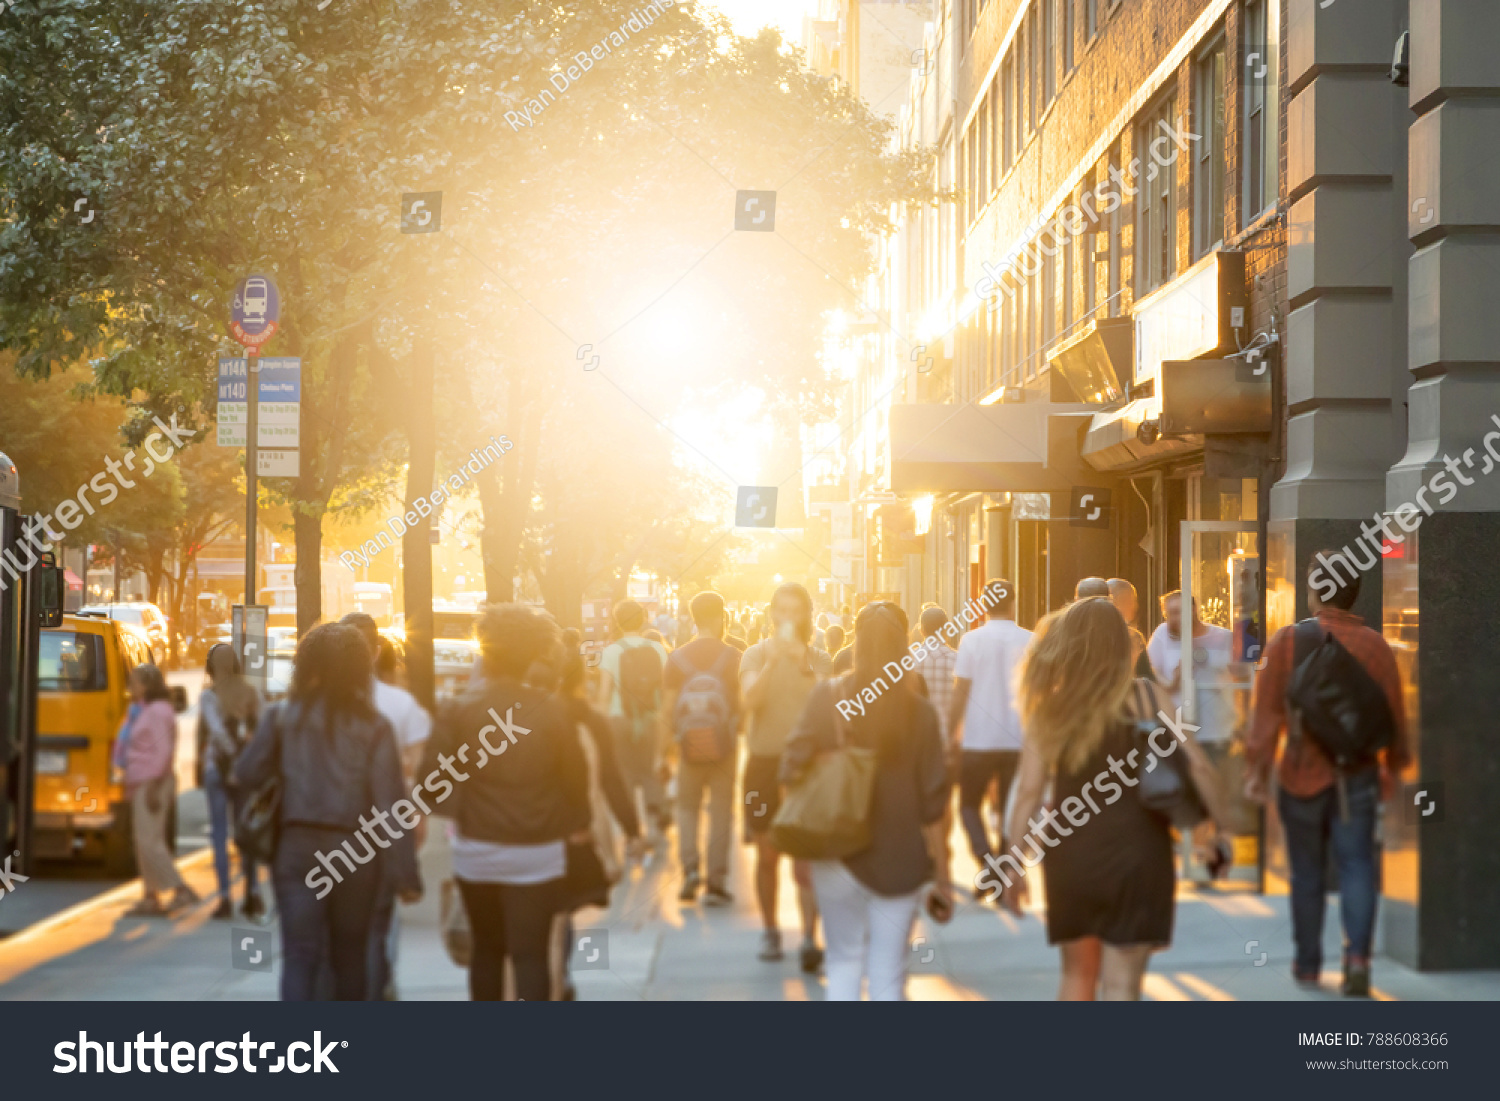 Man stands in the middle of a busy sidewalk looking at his cell phone while crowds of people walk around on 14th Street in Manhattan, New York City with the glow of sunlight in the background. #788608366